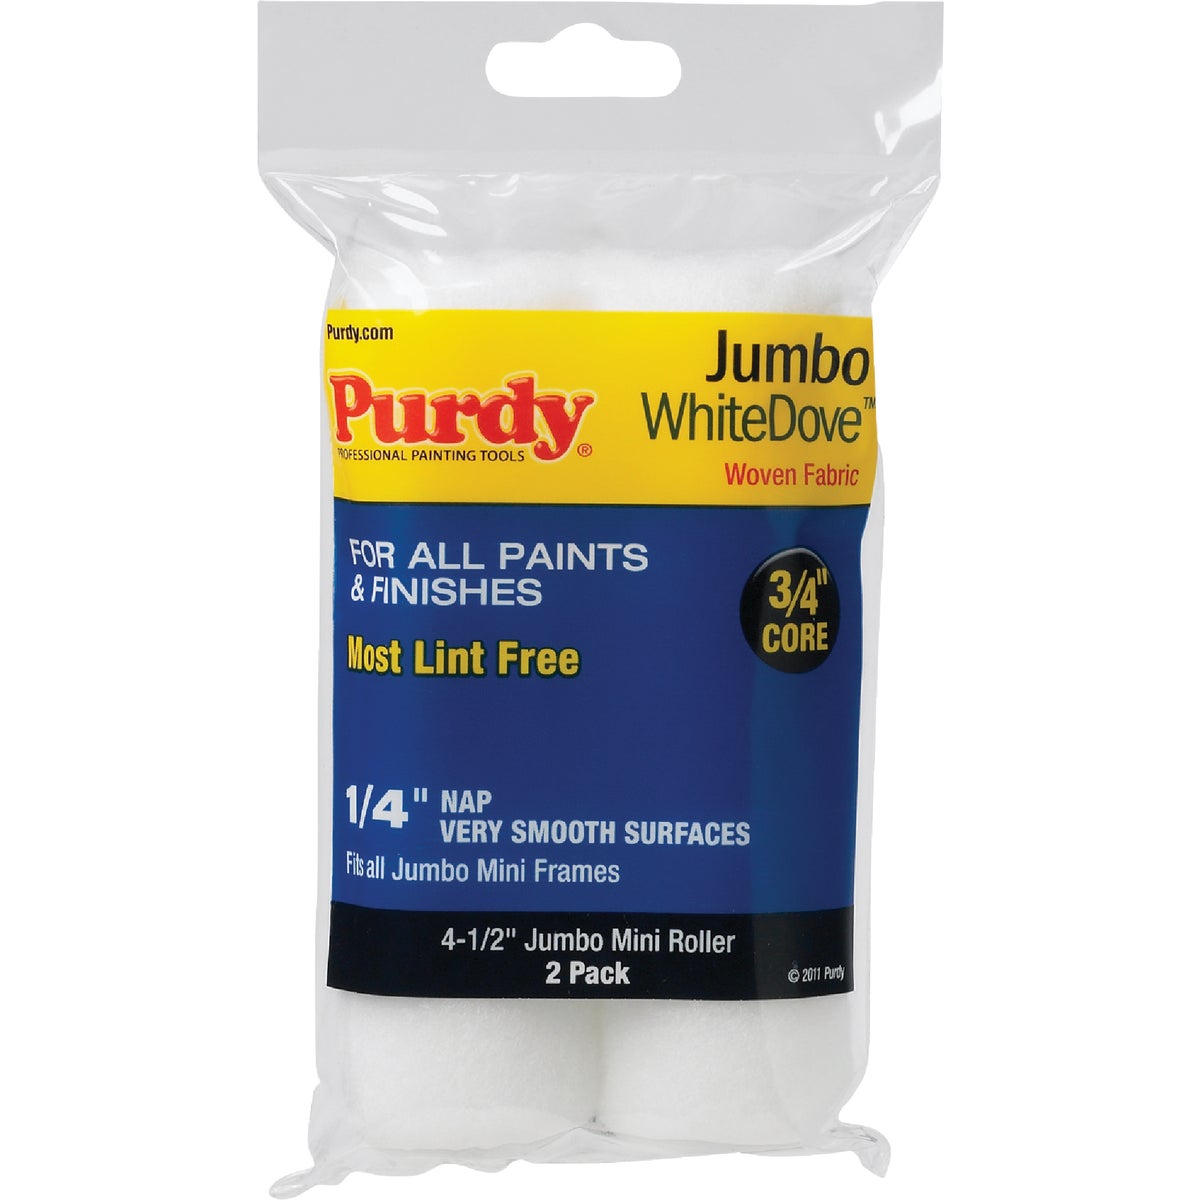 Purdy White Dove 4-1/2 In. x 1/4 In. Jumbo Mini Woven Fabric Roller Cover (2-Pack)